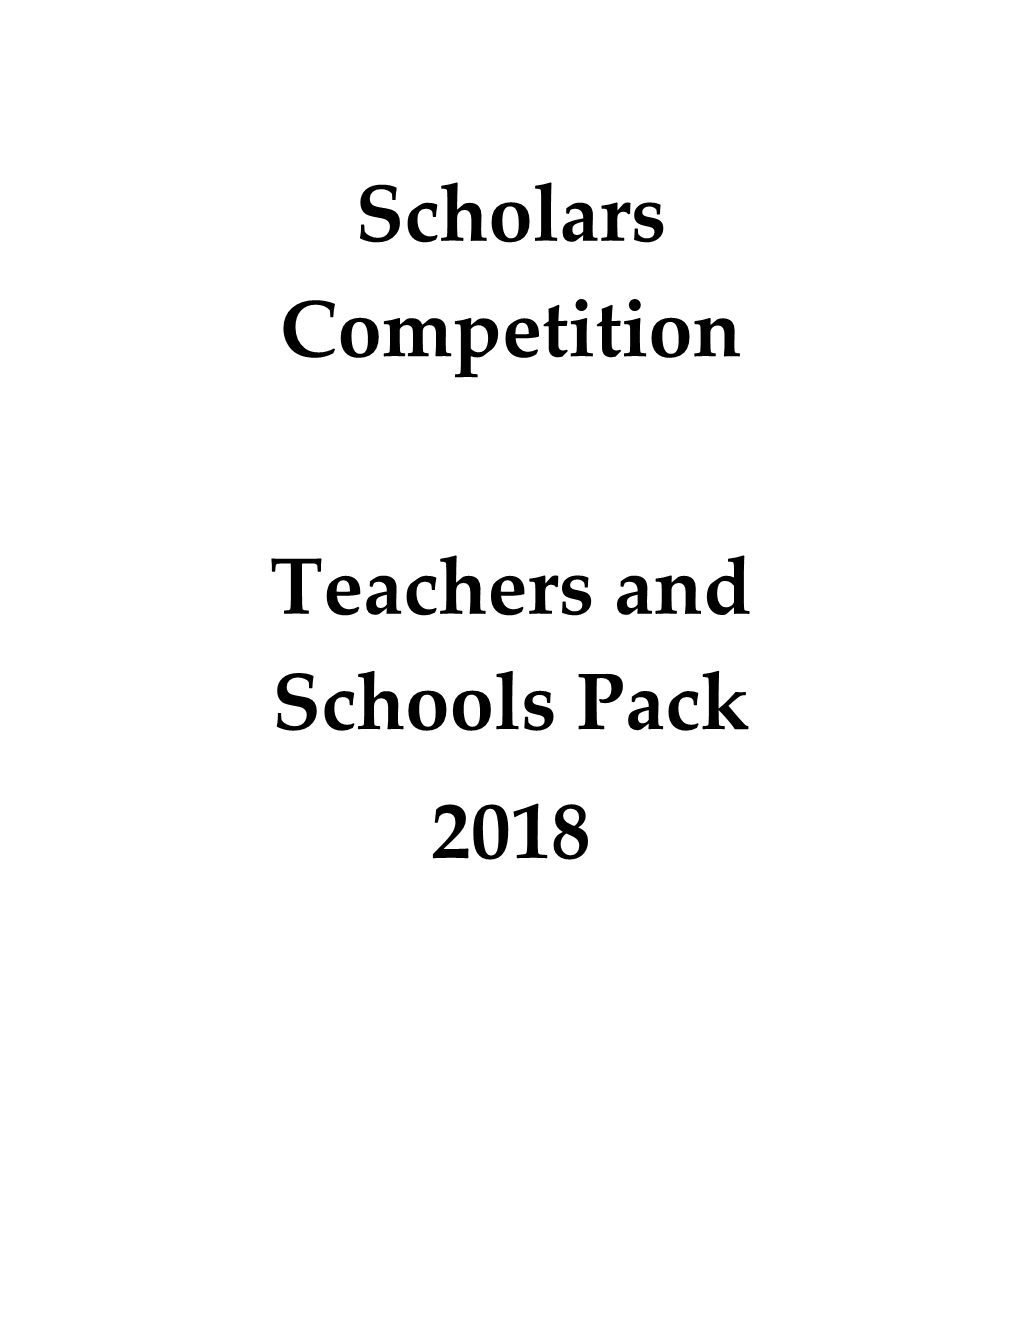 Teachers and Schools Pack